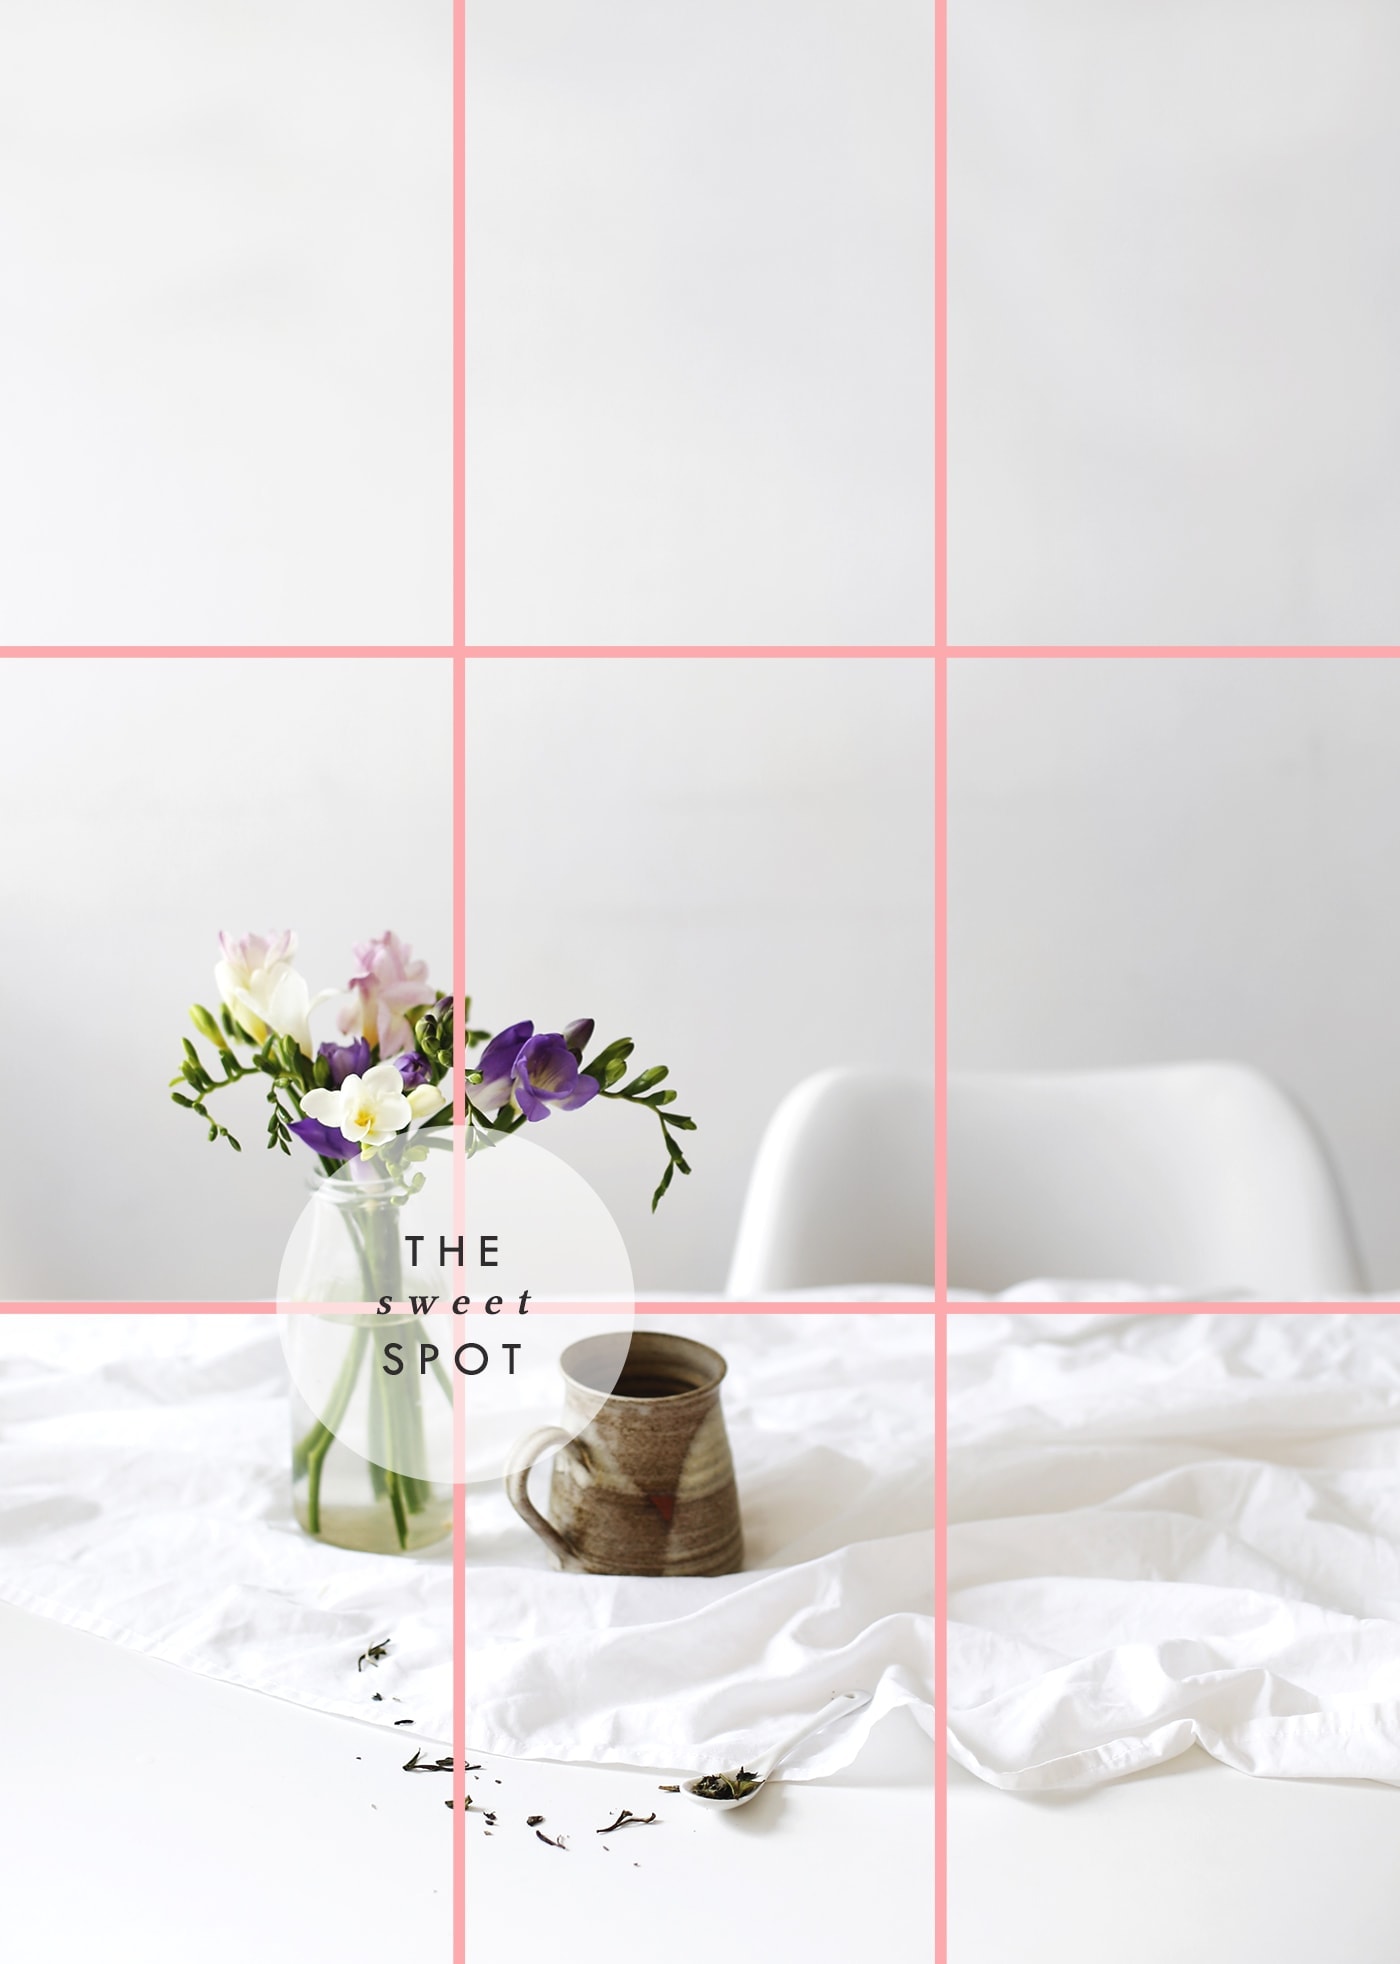 blogger photography tips | the rule of thirds